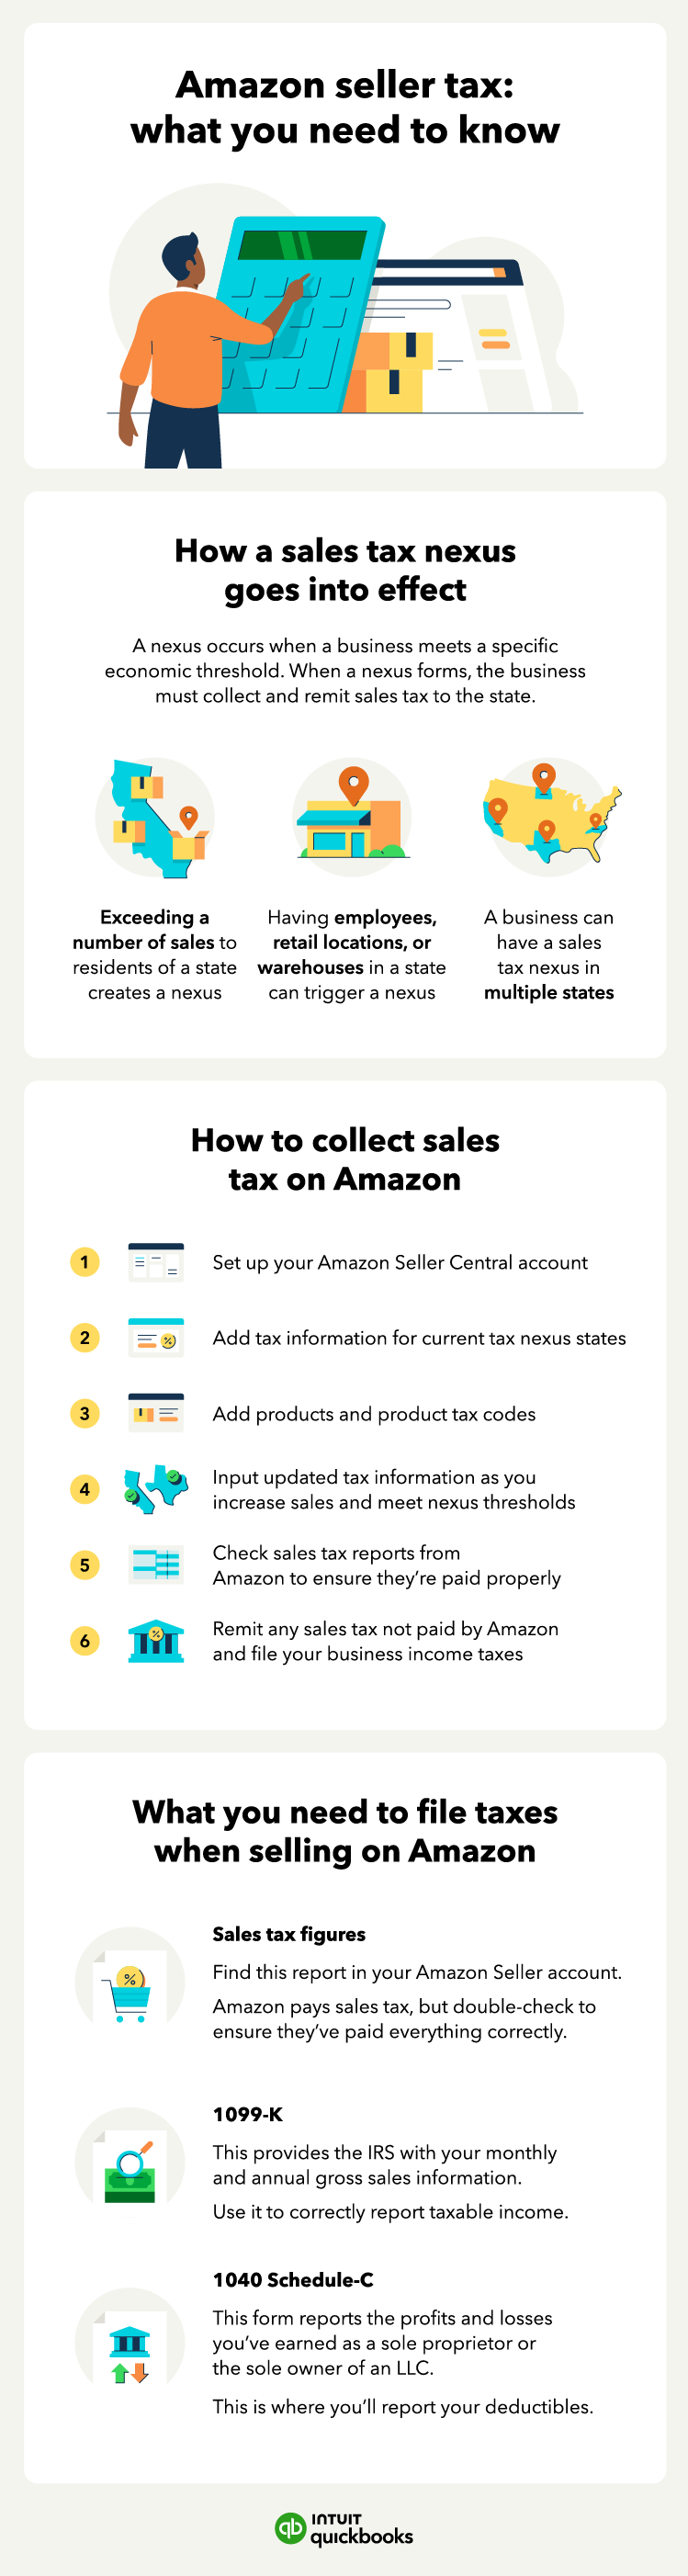 Illustrated infographic of Amazon seller tax information including when sales tax nexus goes into effect, how to collect sales tax on Amazon, and what you need to file taxes after selling on Amazon.